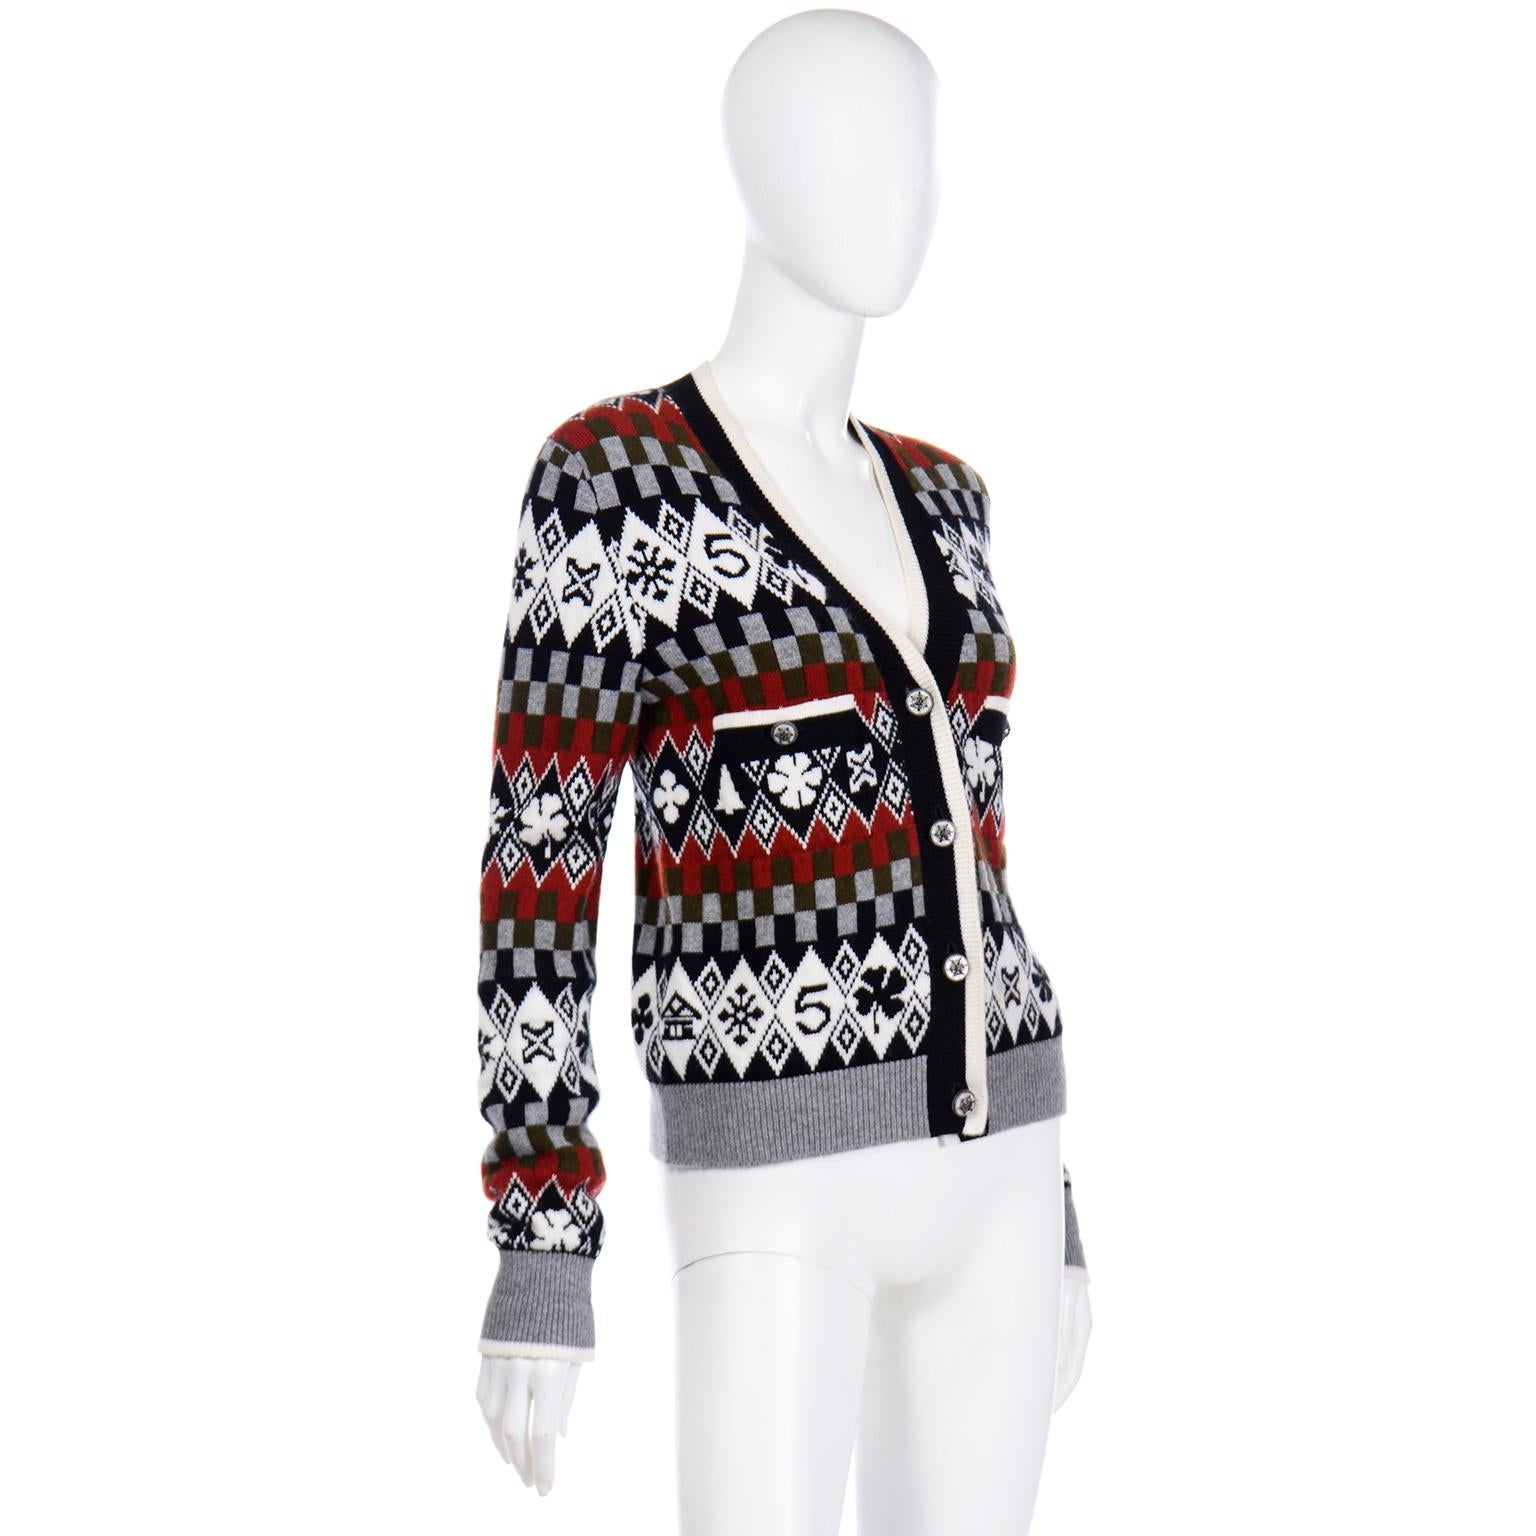 This is a 2019 Chanel NWT cardigan sweater from the last collection designed by Karl Lagerfeld for Chanel. The snowy runway at the Grand Palais, was a fantastical winter wonderland. This cardigan is in a  winter print that includes camellias,